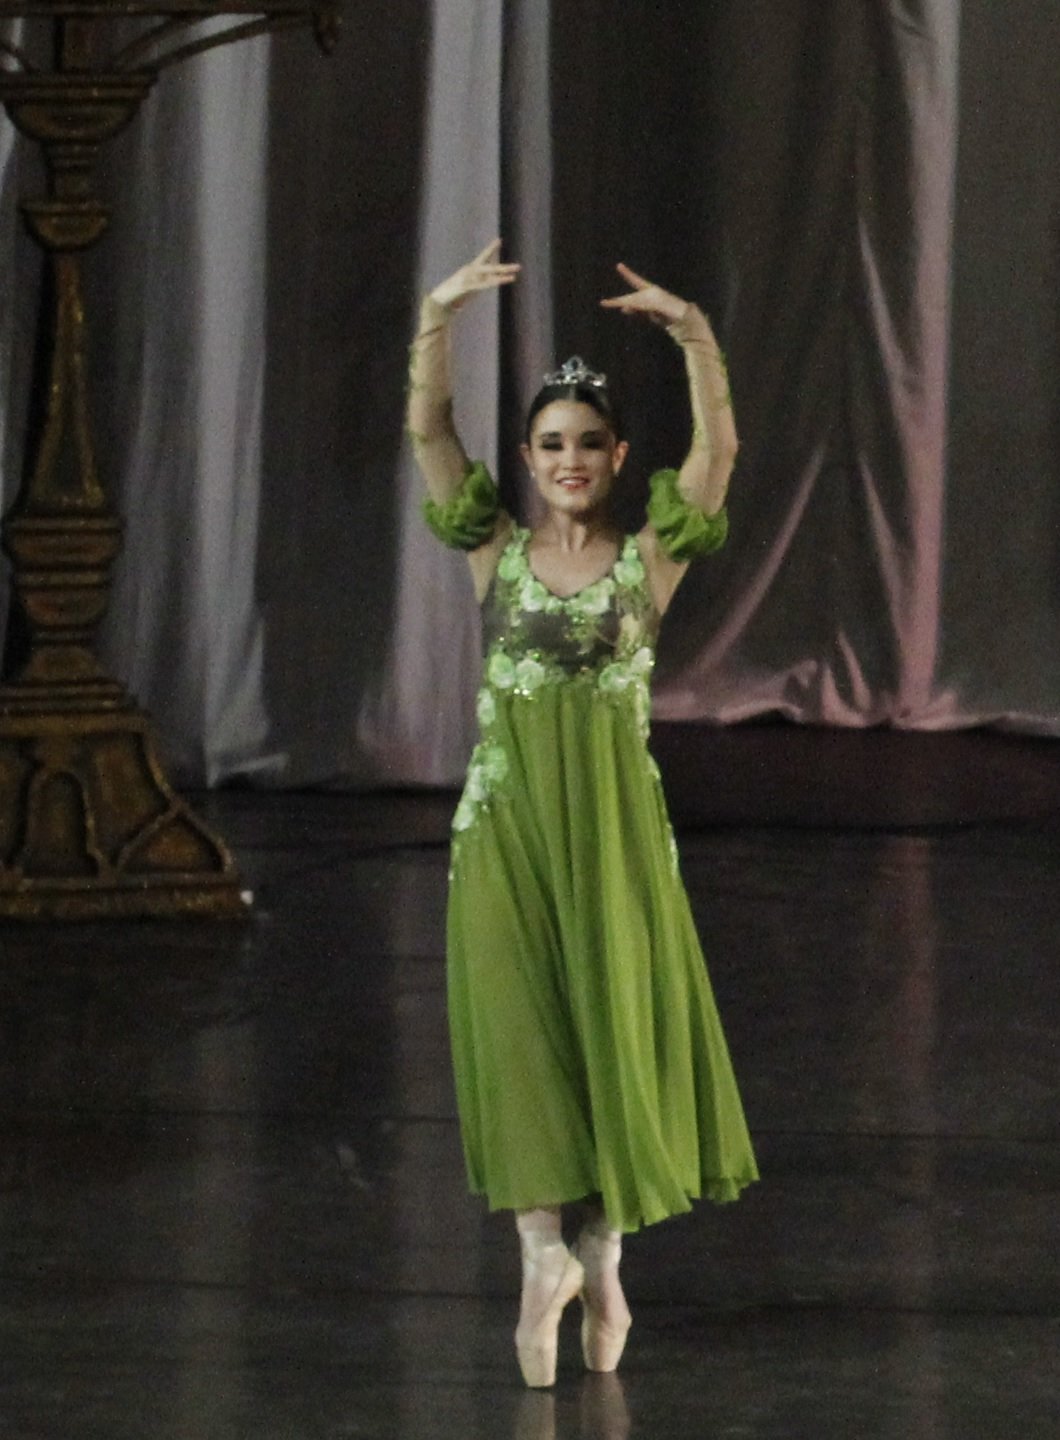    Tiffany Chiang-Janolo looks every inch the dainty princess as she wears an olive green frock with floral appliques and glittery beads. She danced as one of the royal daughters in  Labindalawang Masasayang Prinsesa , one of tales showcased in  Tatl